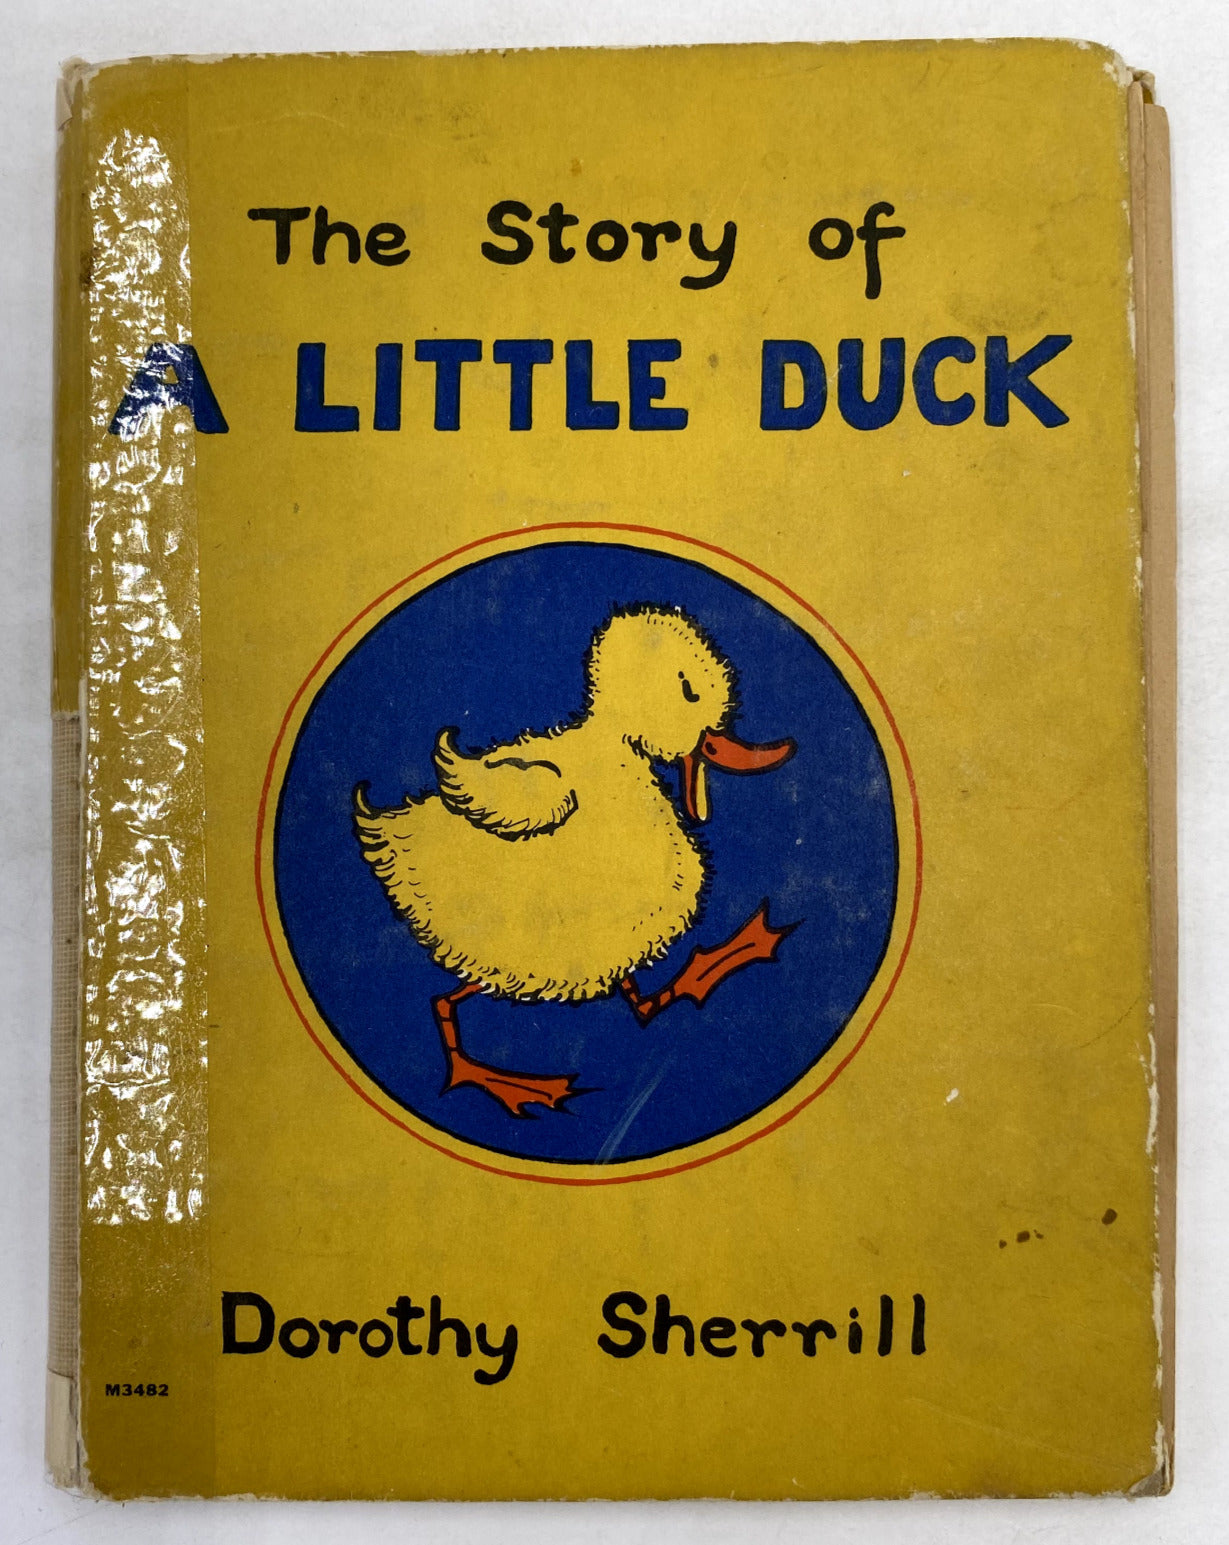 "The Story of a Little Duck" by Dorothy Sherrill #M3482 Merrill 1934